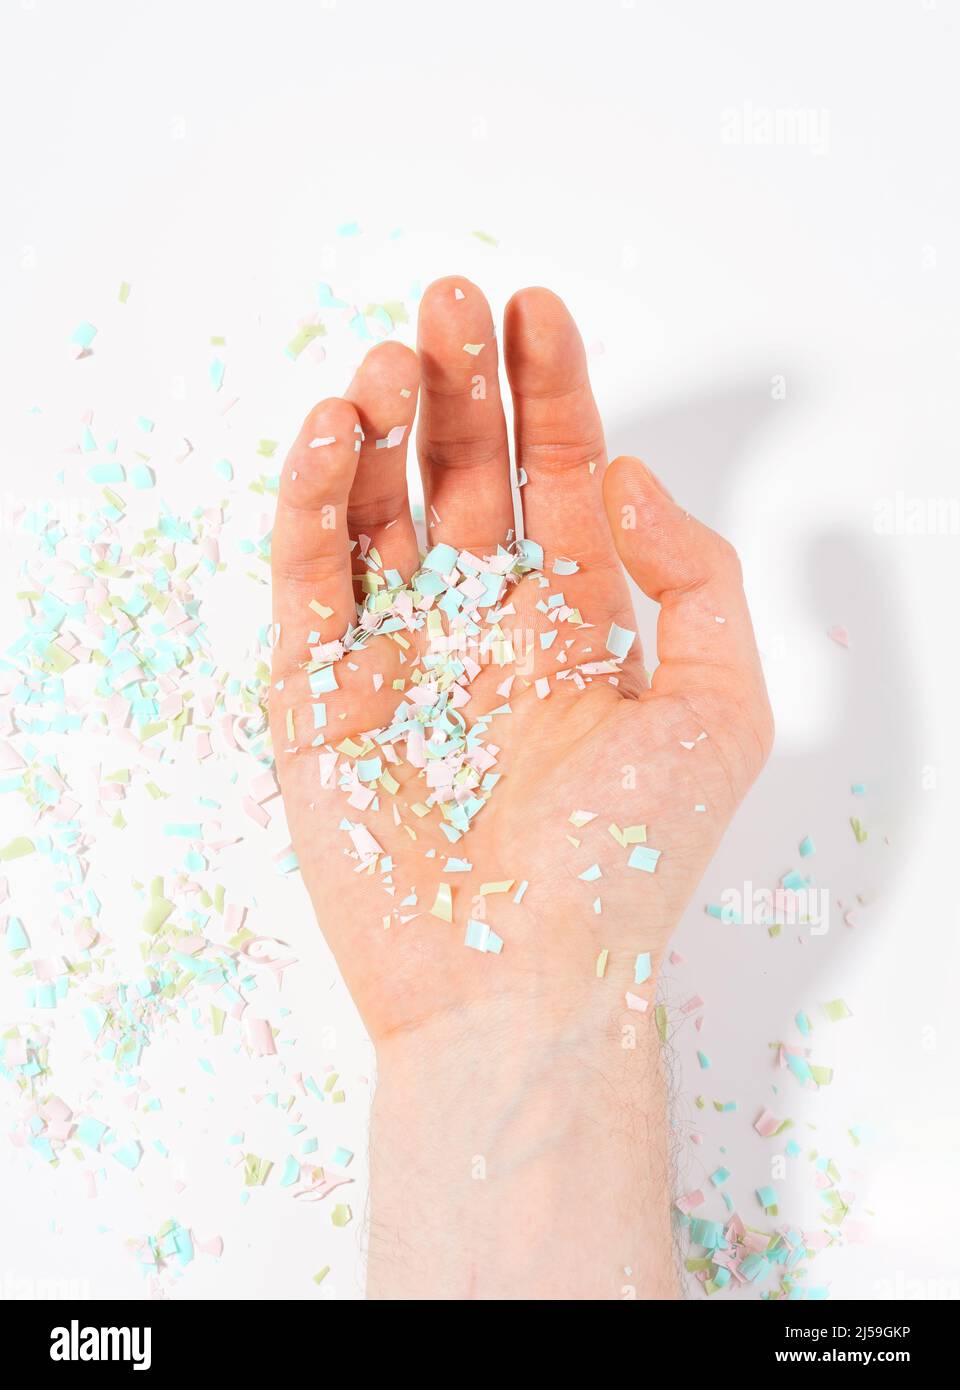 Shot of microplastics lay on people hand. Concept of water pollution and global warming. The idea of environmental damage. Top view, white background. Stock Photo